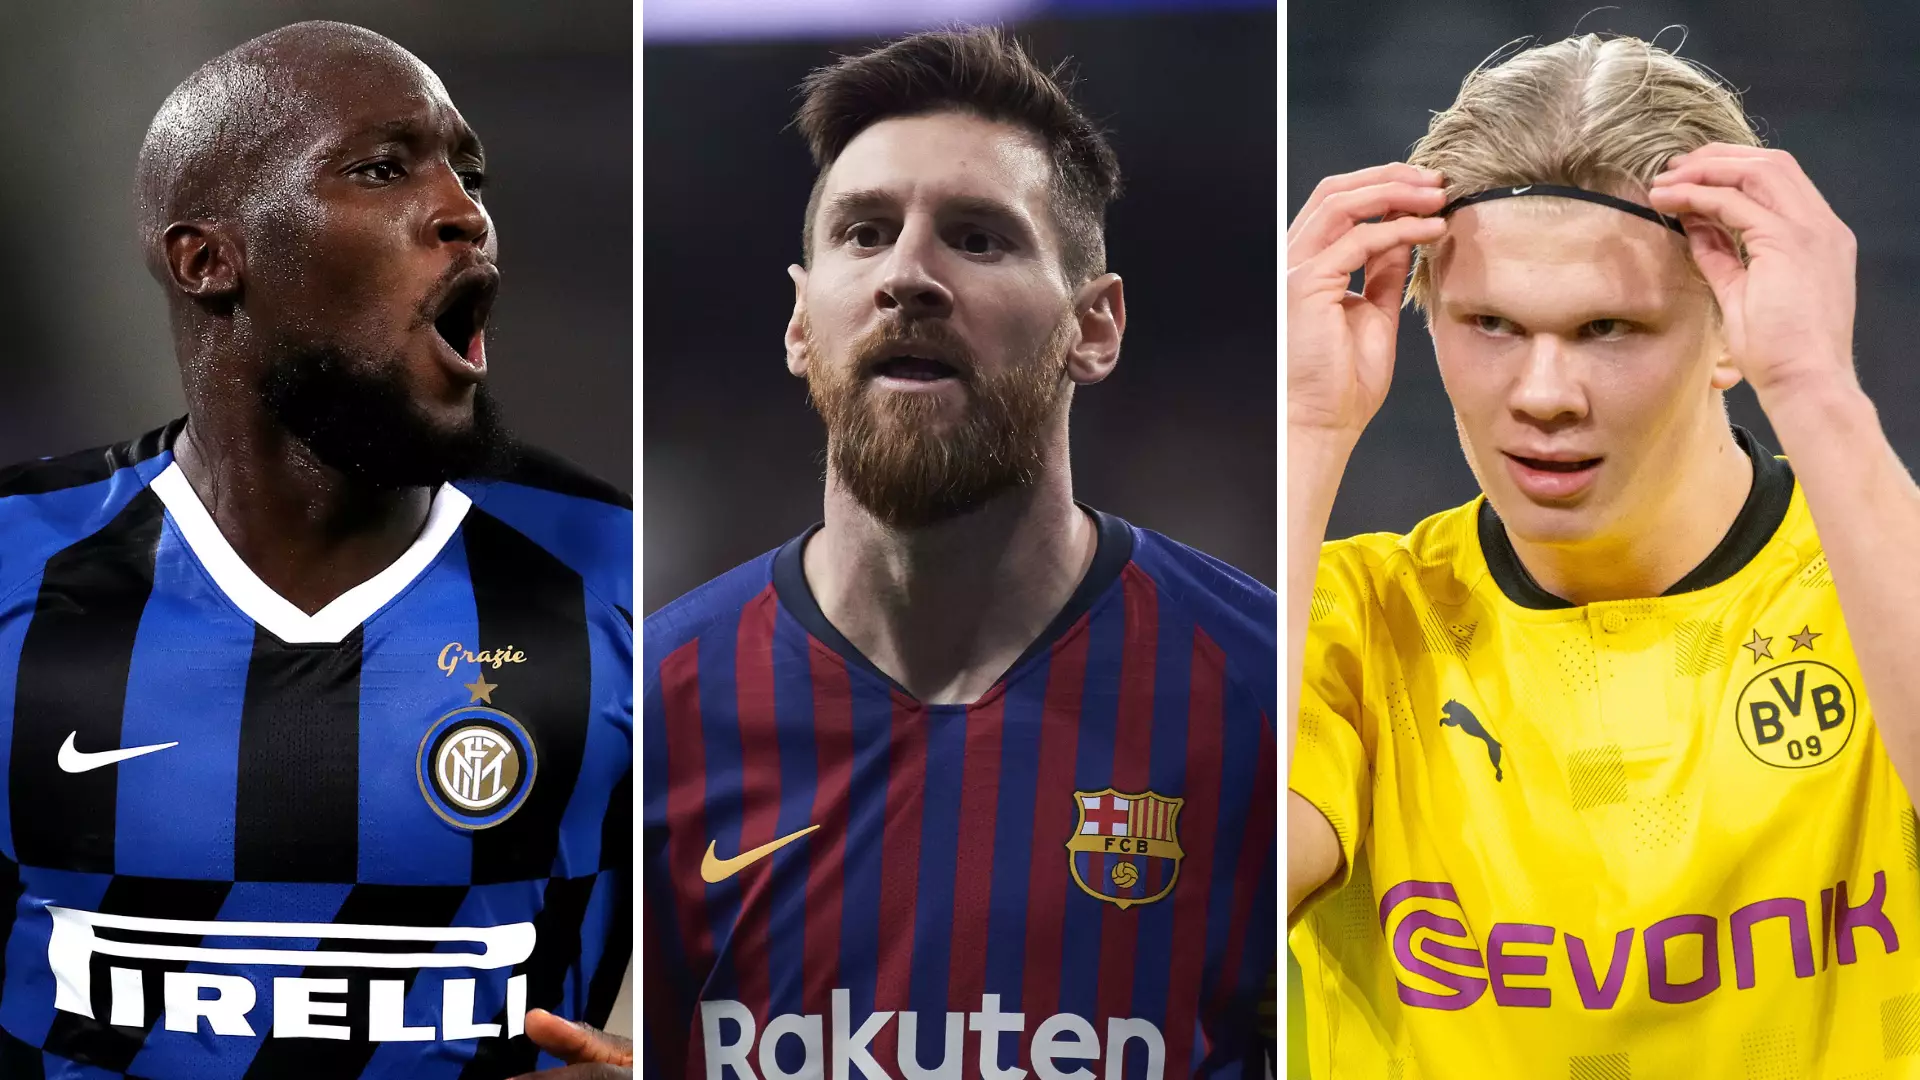 Football Manager 2021 Predicts The Best Players In The World For The Next 10 Years